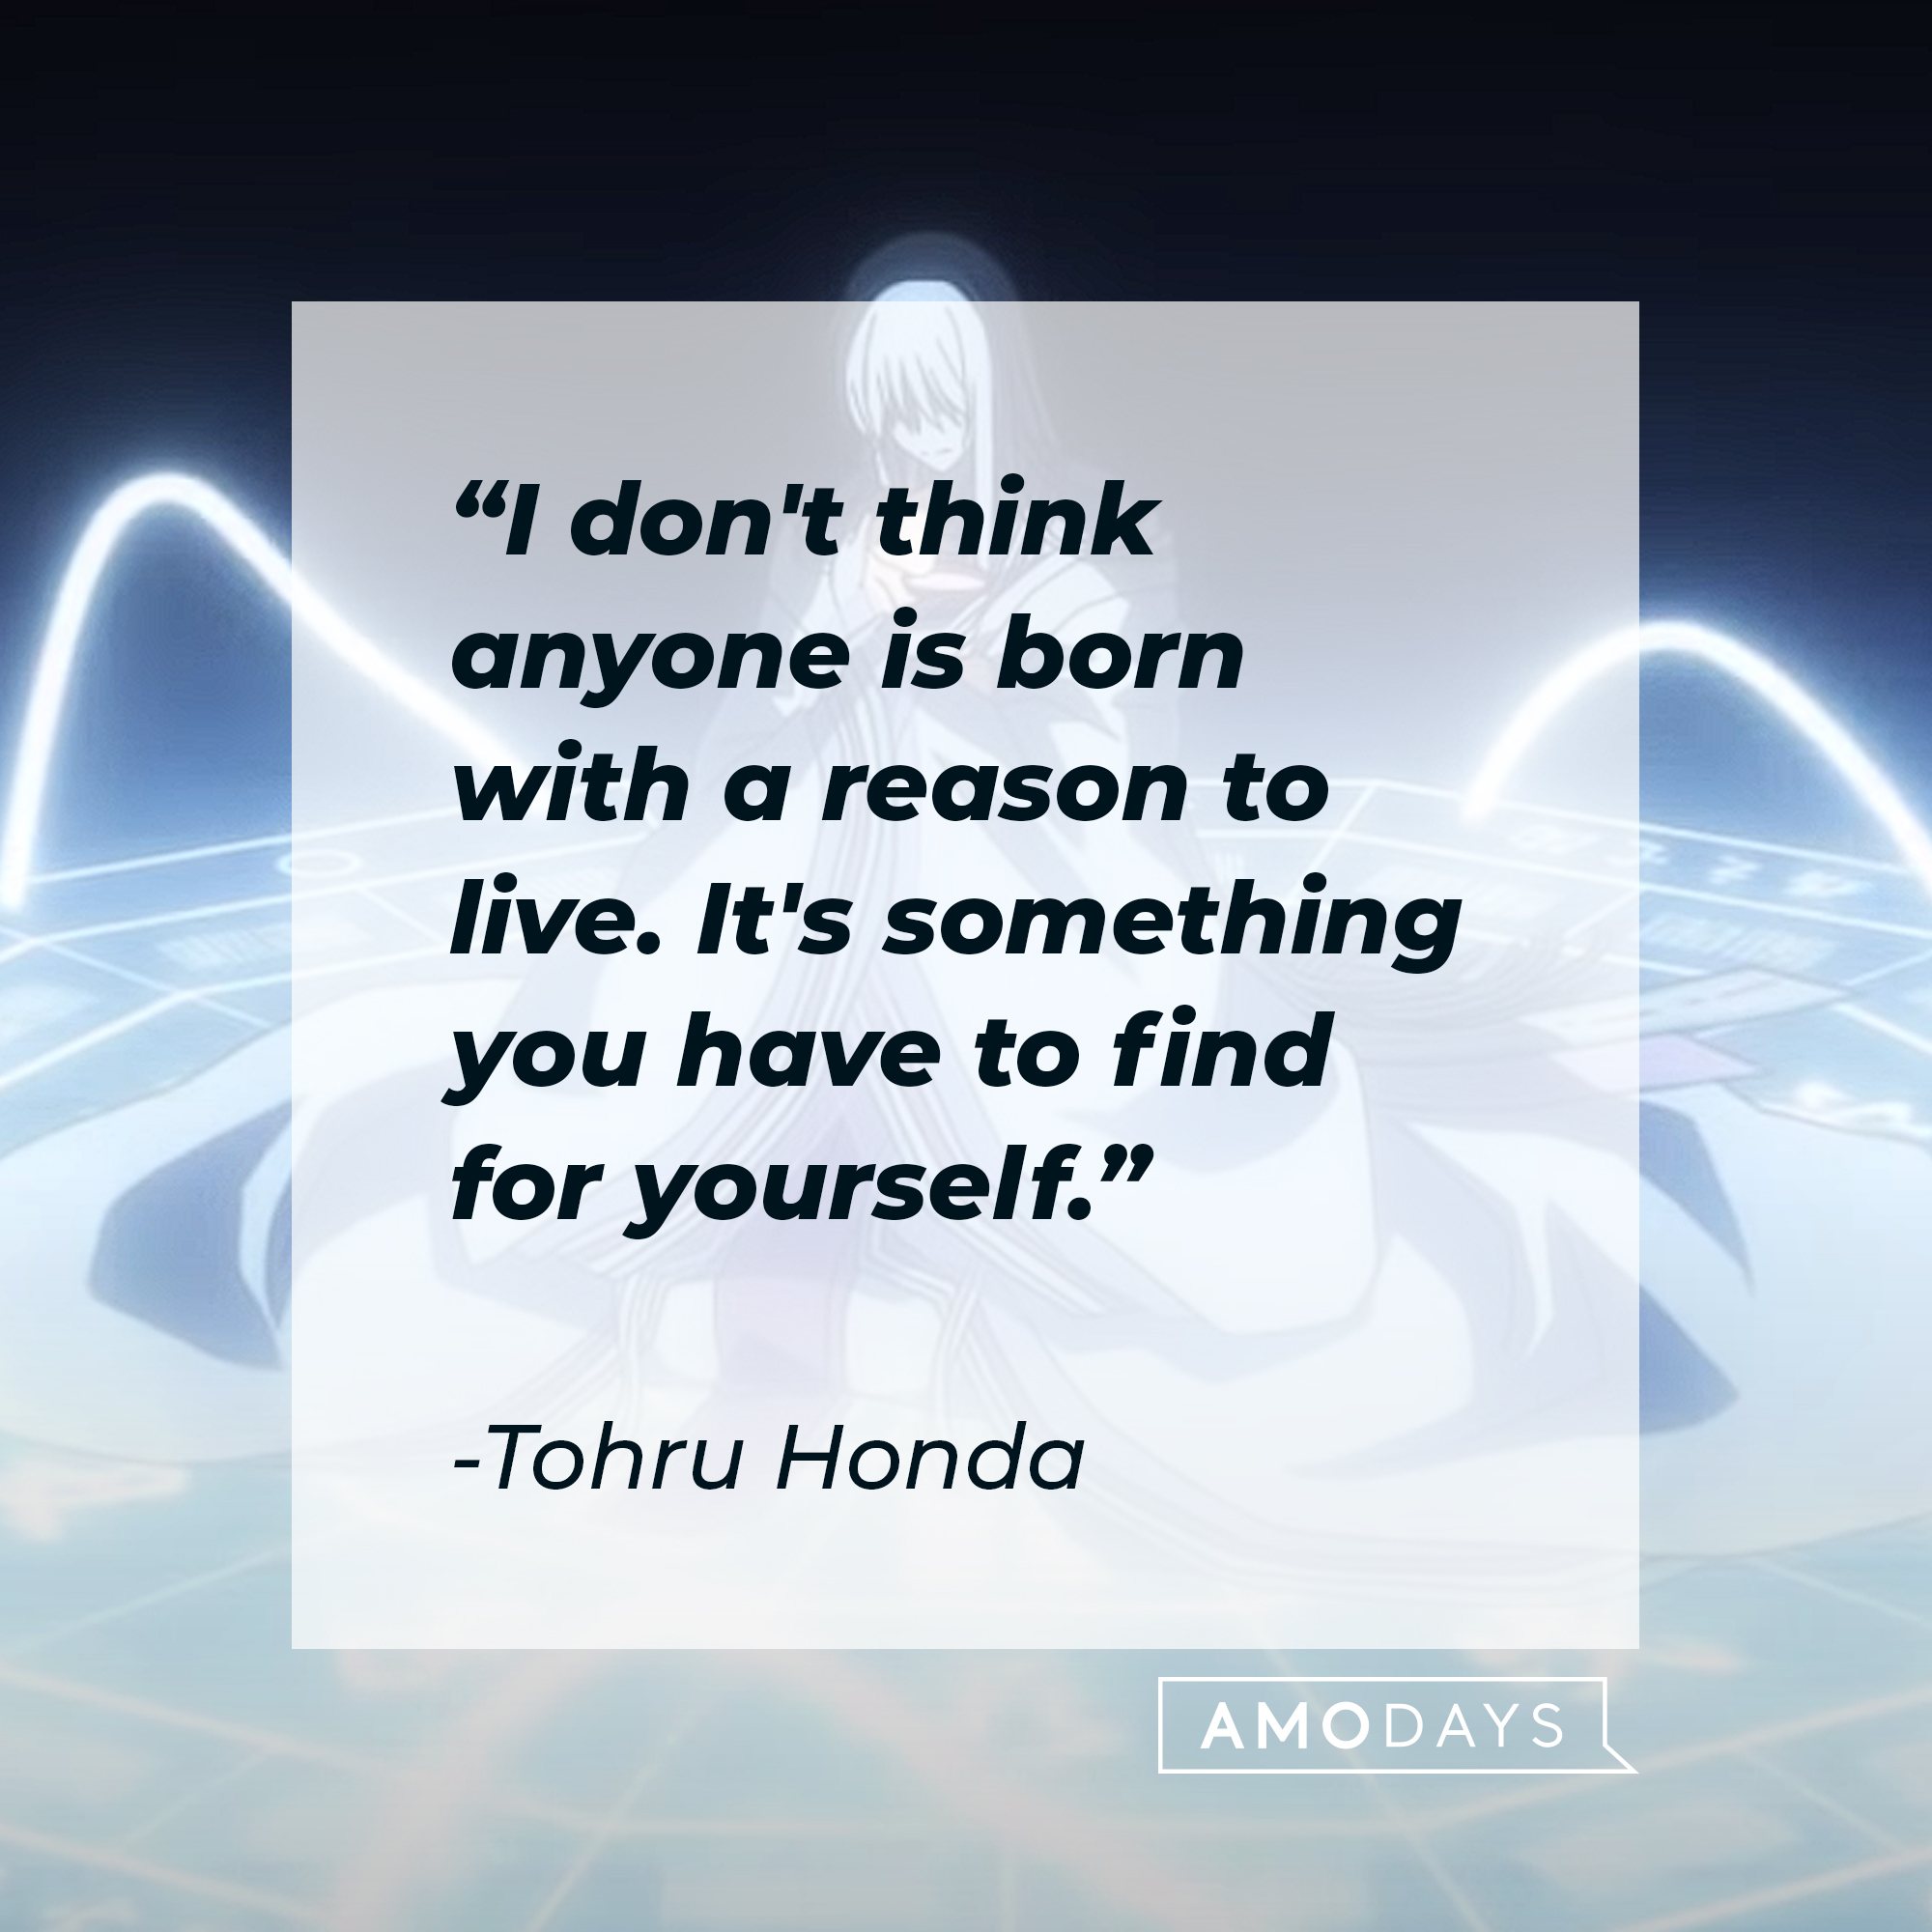 Tohru Honda's quote: "I don't think anyone is born with a reason to live. It's something you have to find for yourself." | Image: youtube.com/Crunchyroll Collection